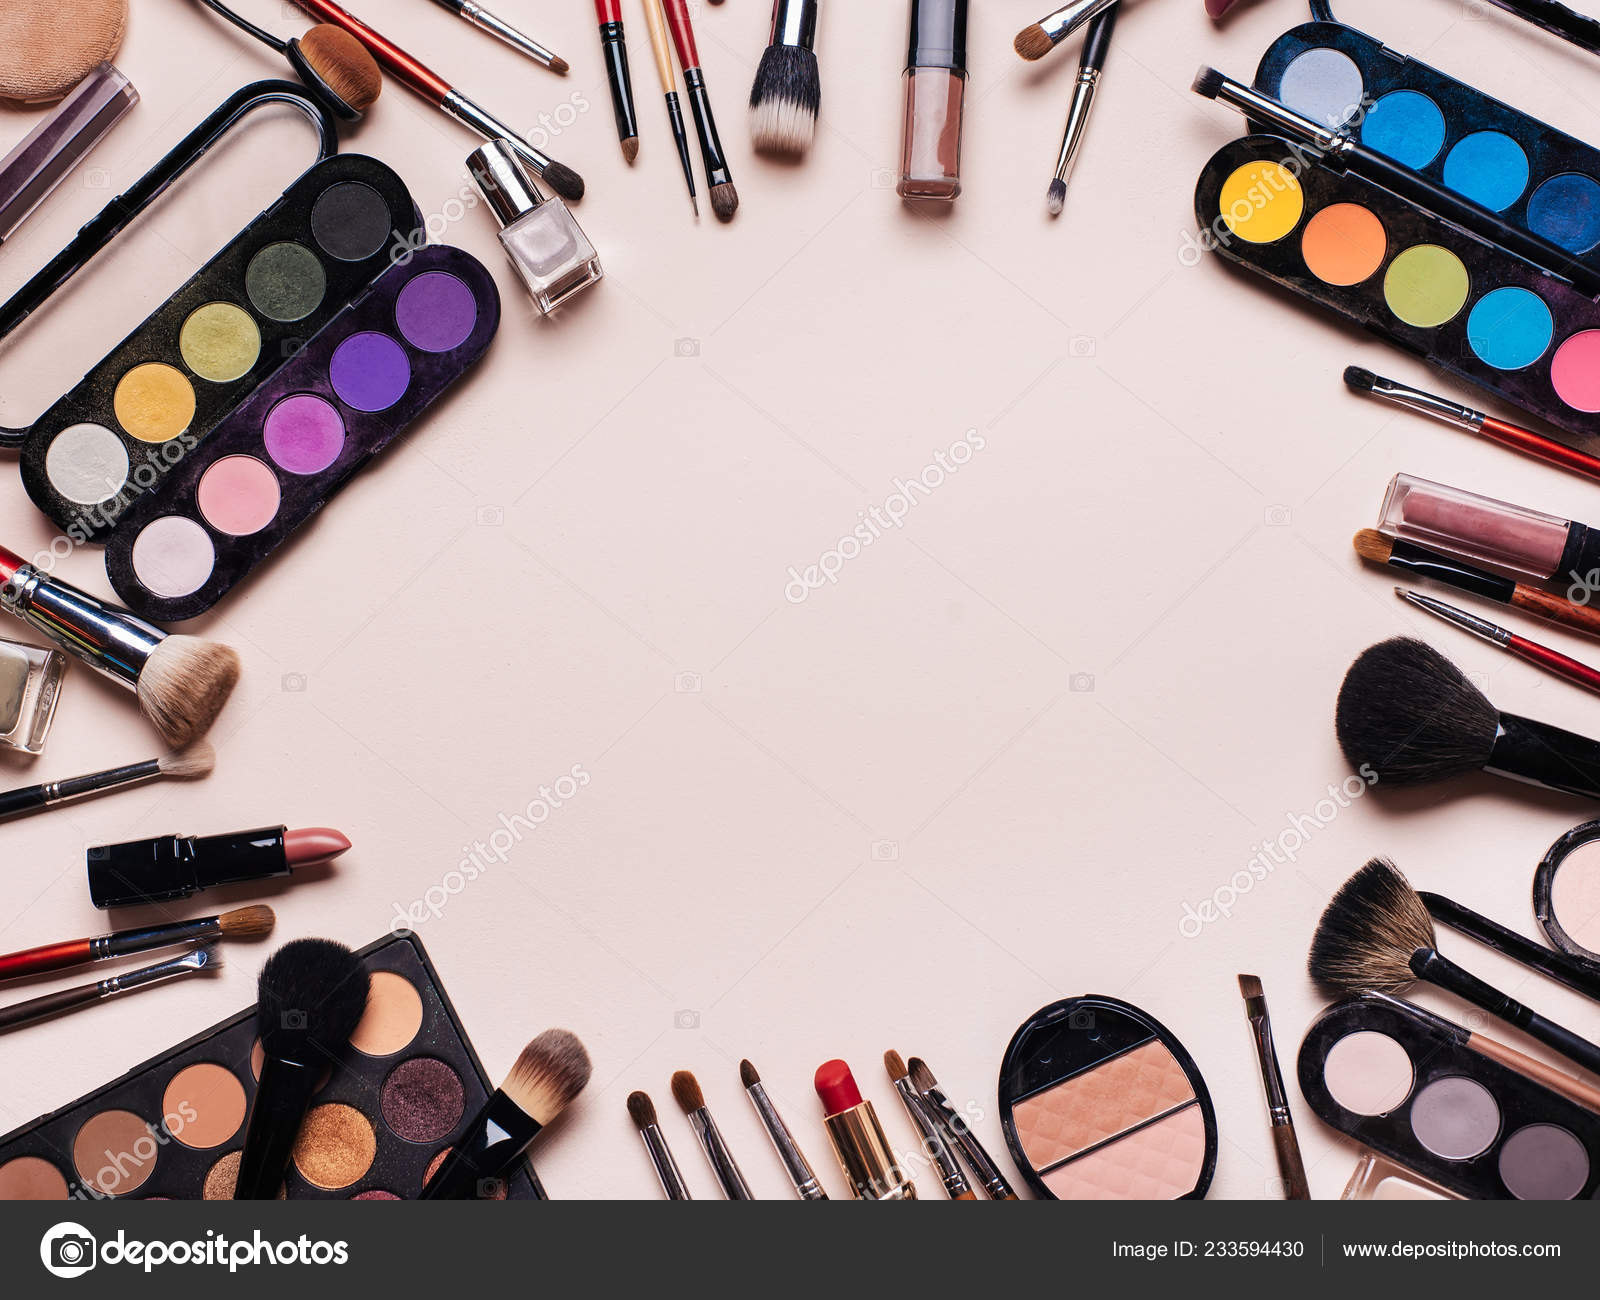 Set of professional cosmetics, makeup tools and accessories for